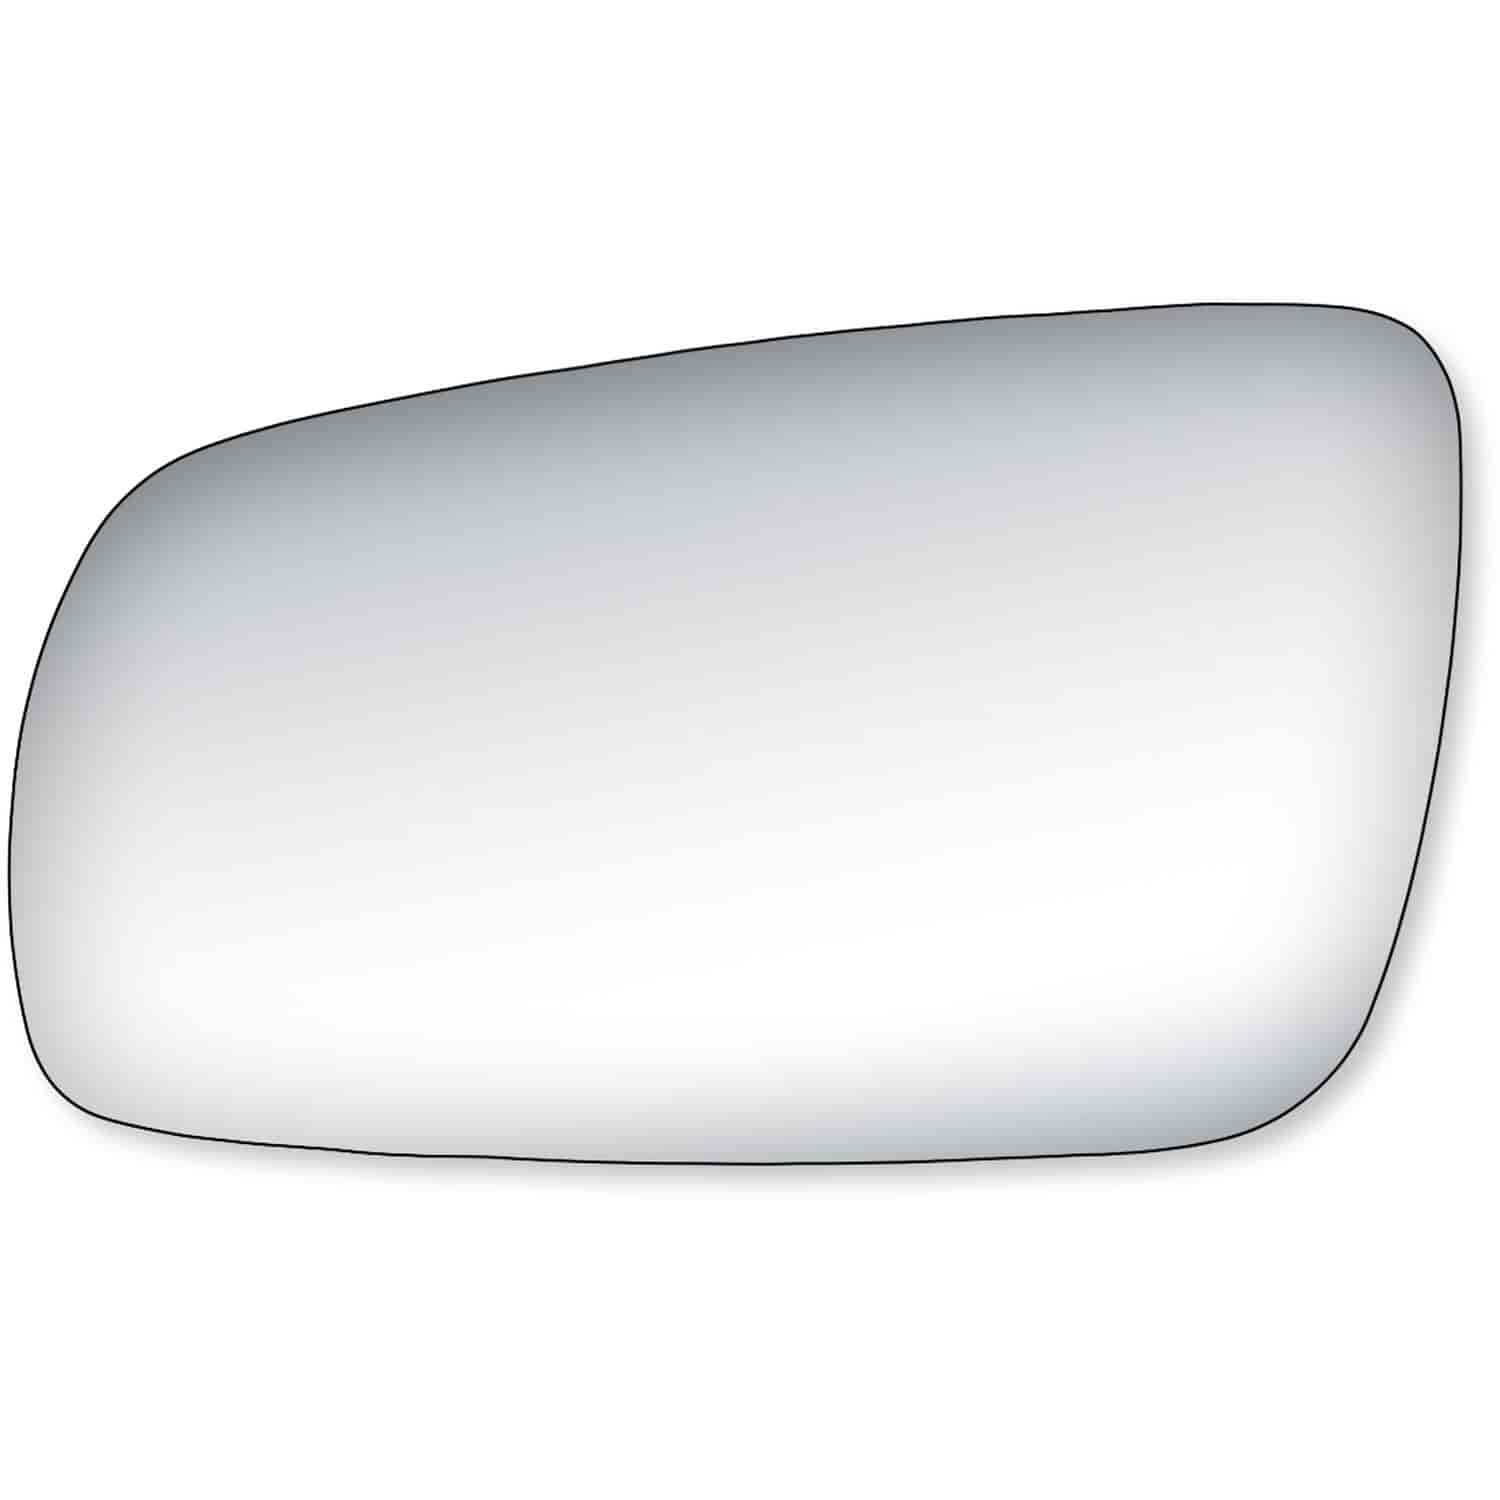 Replacement Glass for 99-05 Golf/ GTI 4th Generation